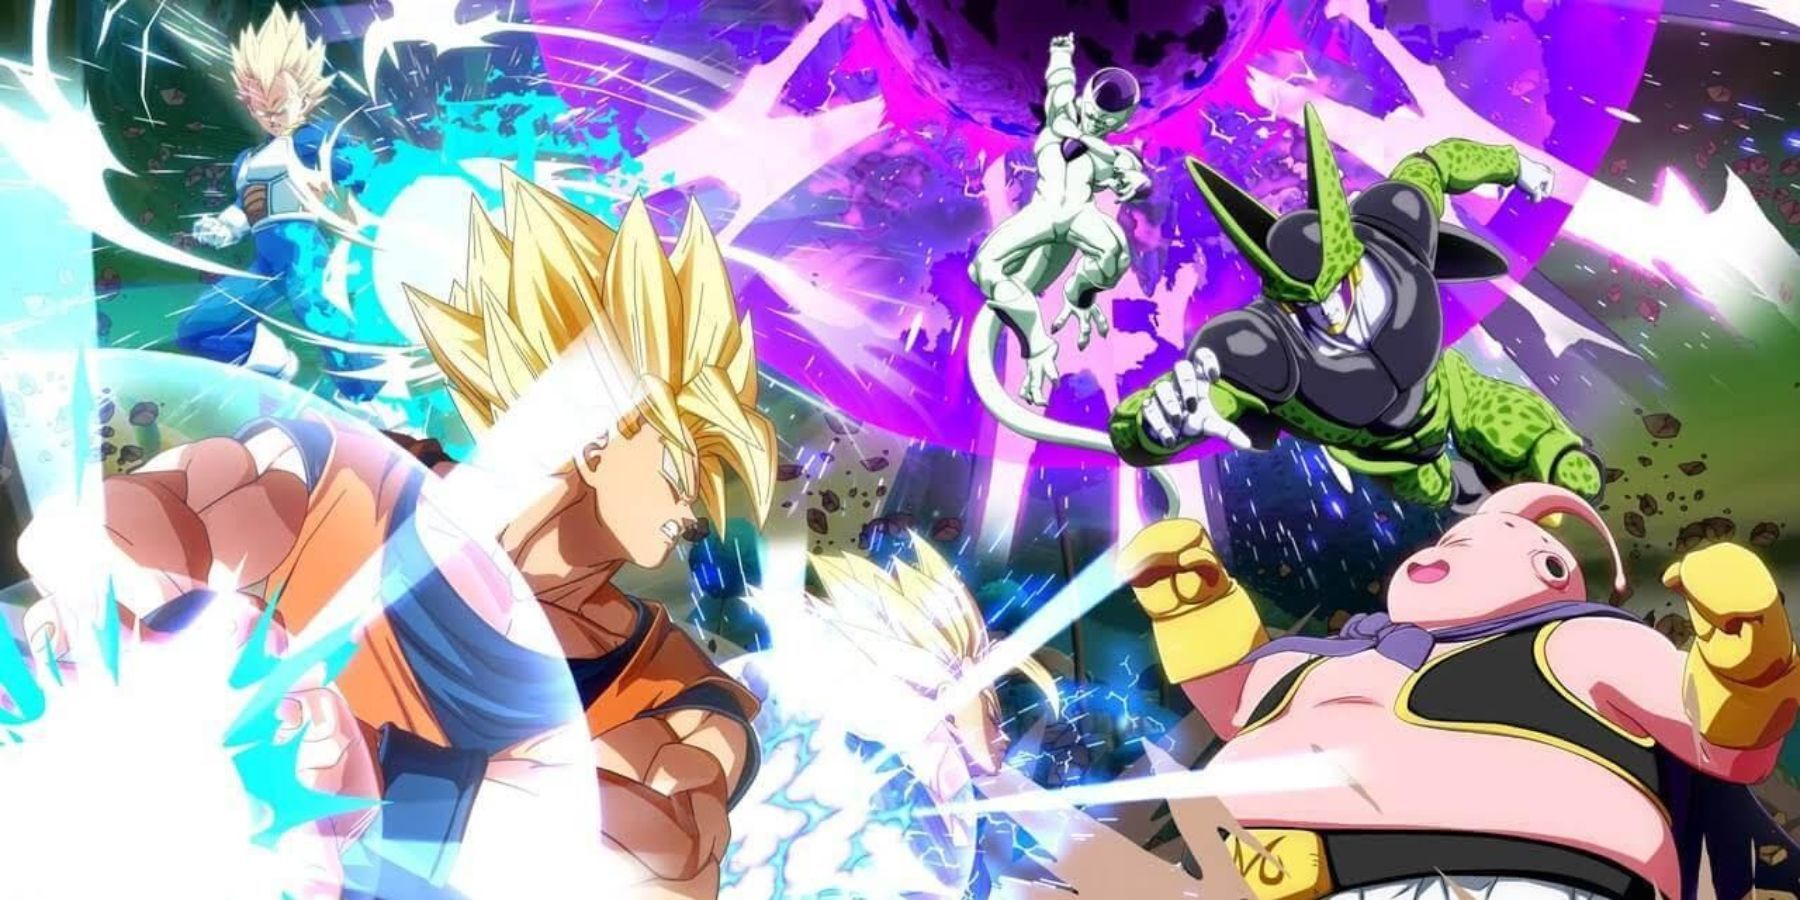 Rollback netcode beta test for Dragon Ball FighterZ coming soon, new  balance update in the works